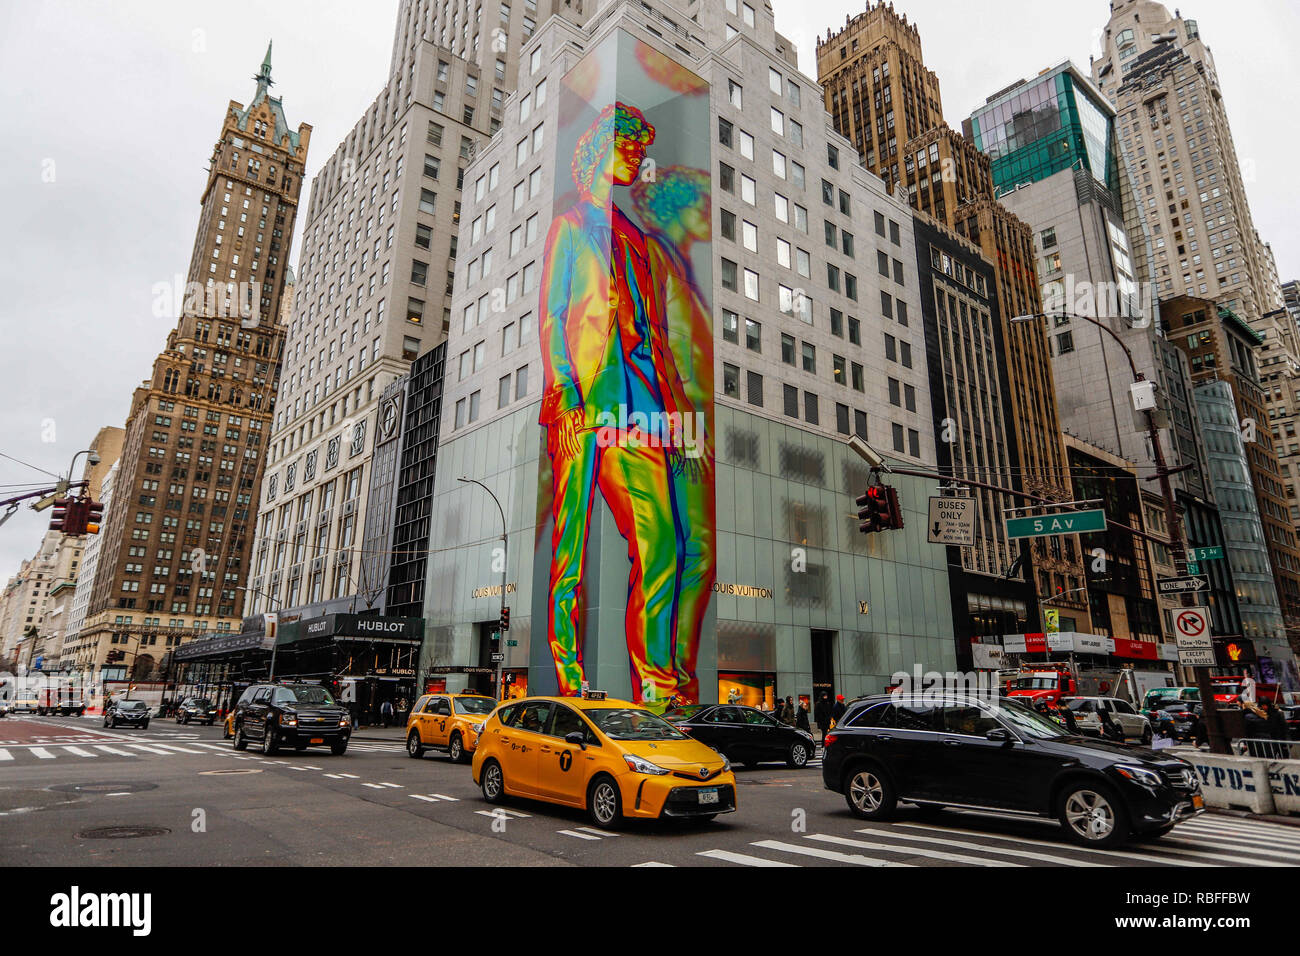 Facade of the Louis Vuitton Store on the 5th avenue Stock Photo - Alamy